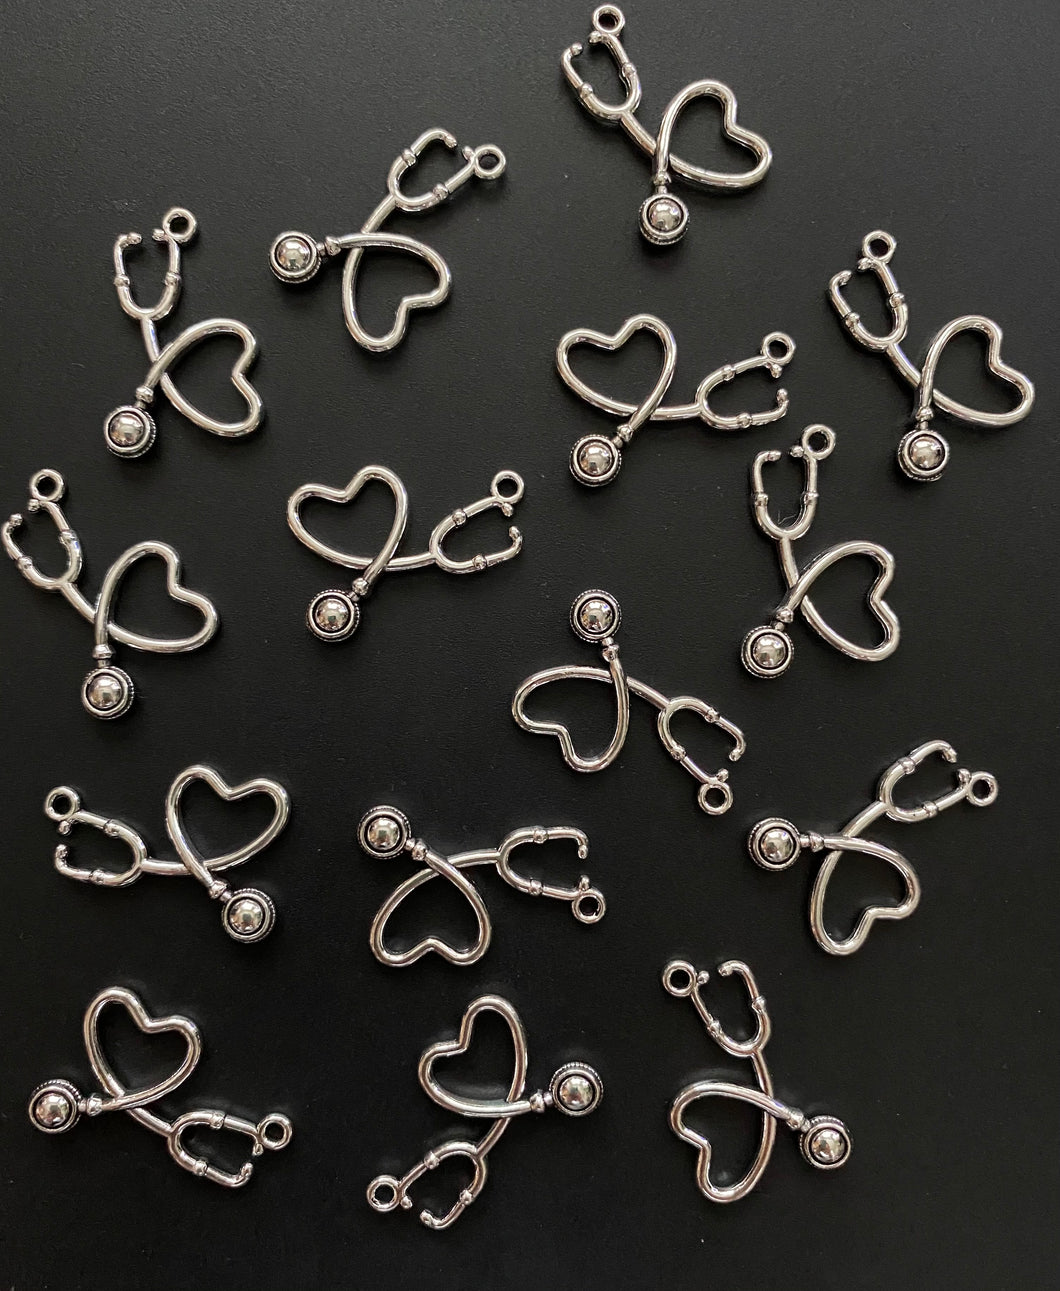 15 Stethoscope Charms